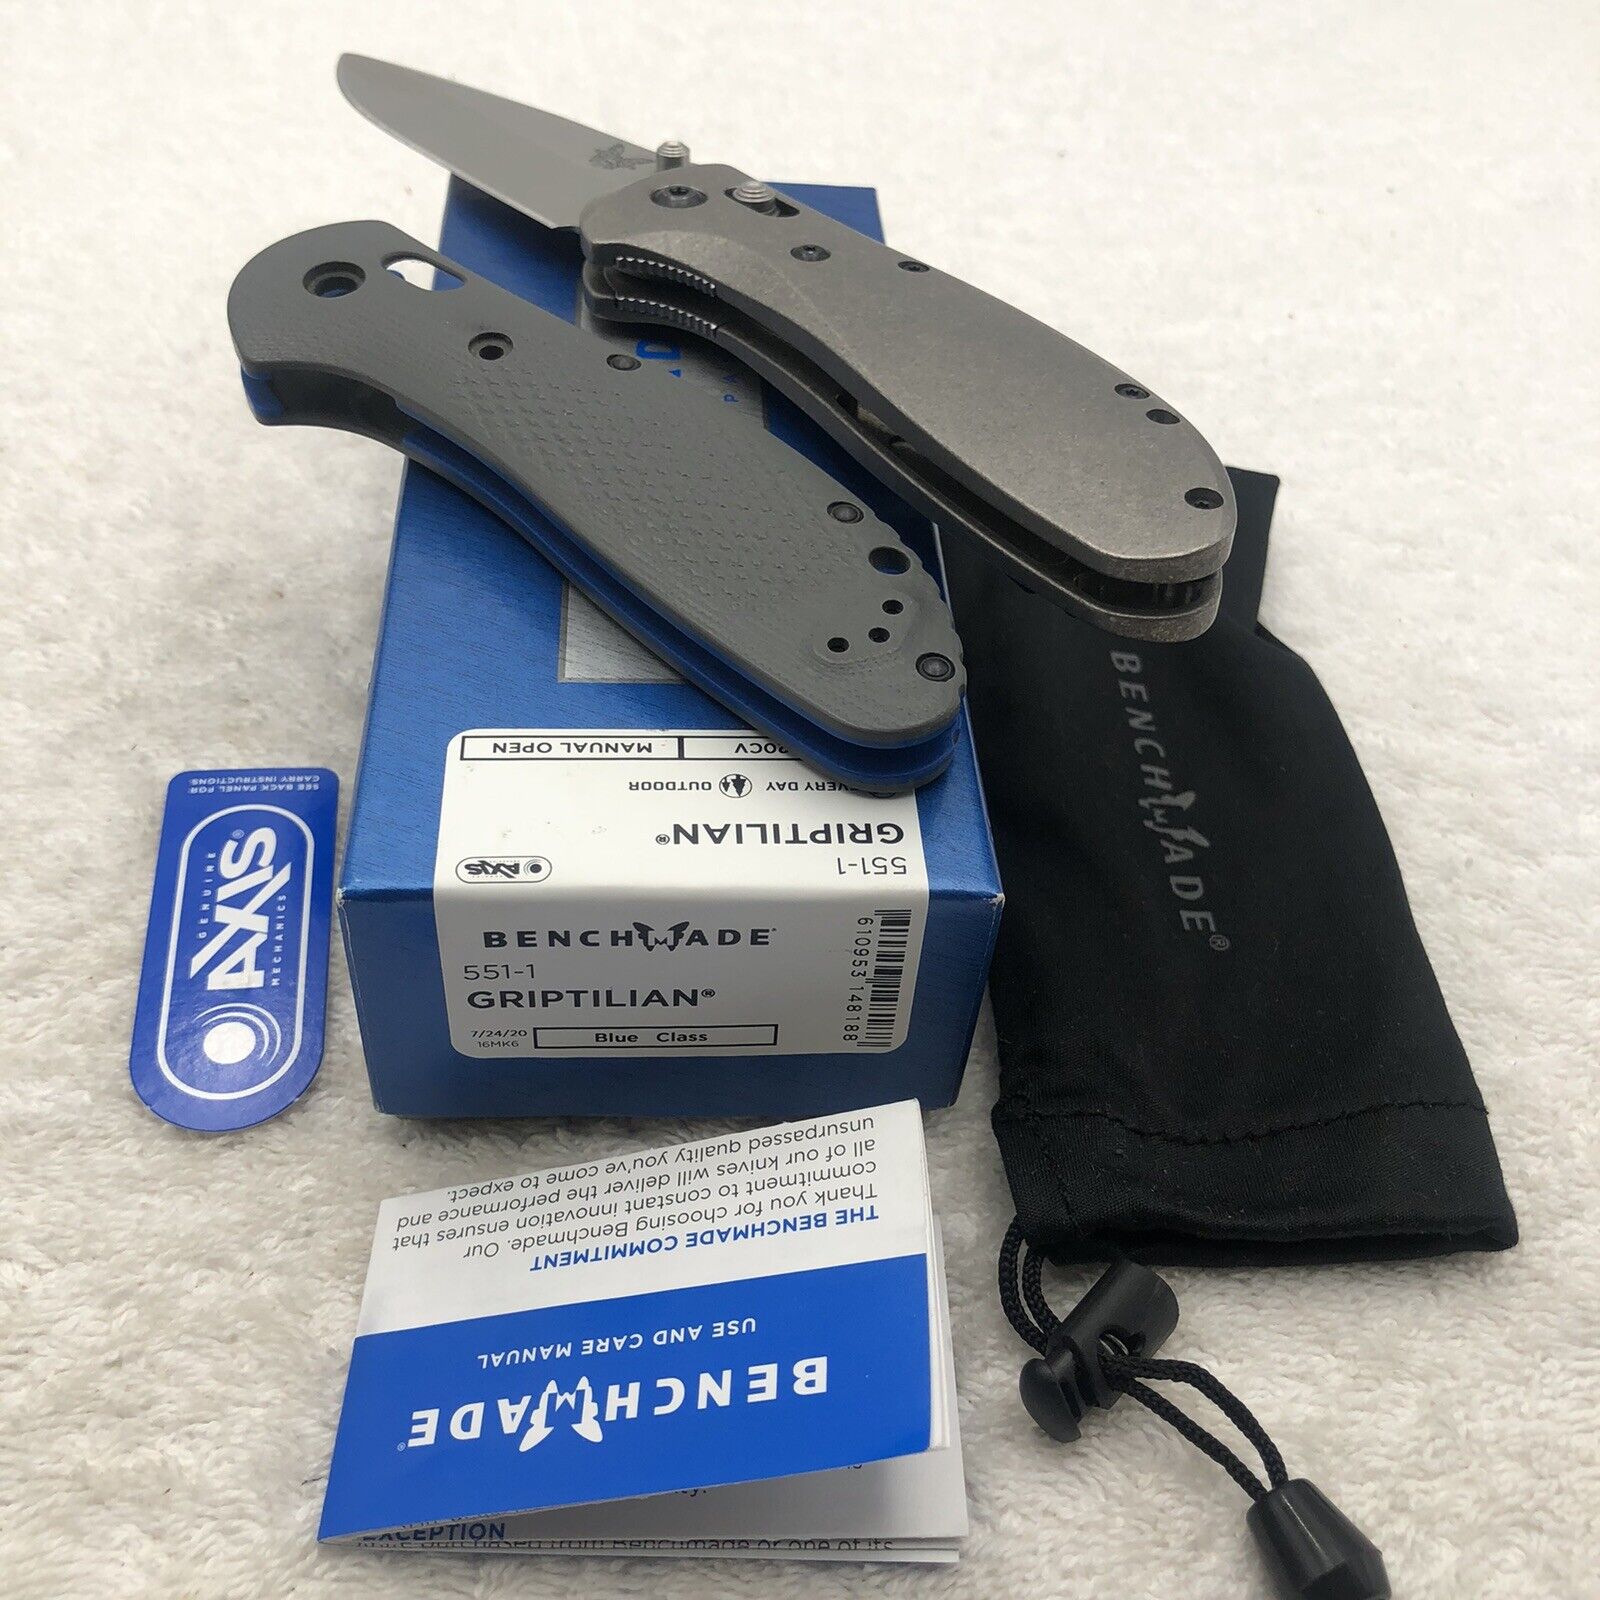 Discontinued Benchmade 551-1 Griptilian Folder In Box Made In USA Discontinued